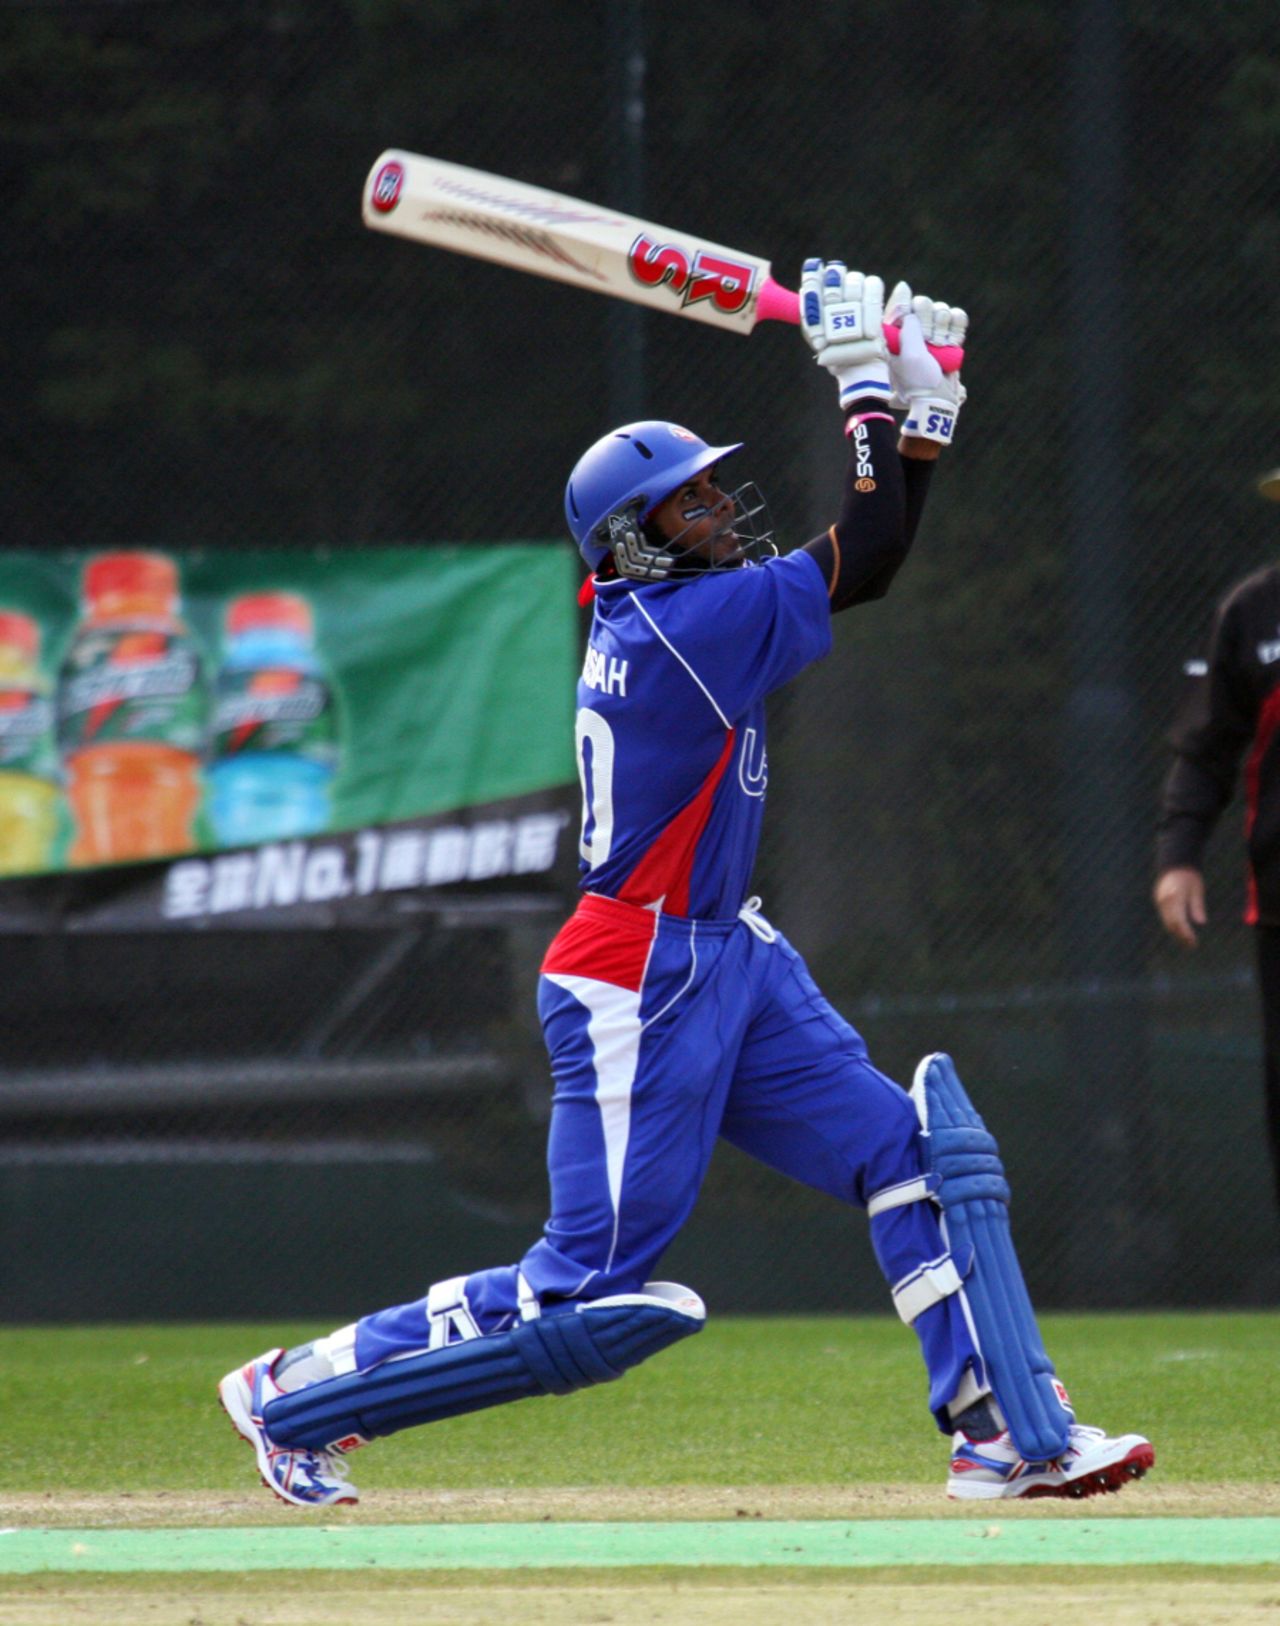 Steve Massiah smashes one of his sixes during his knock, Hong Kong v United States of America, WCL Div. Three, Kowloon, January 22, 2011